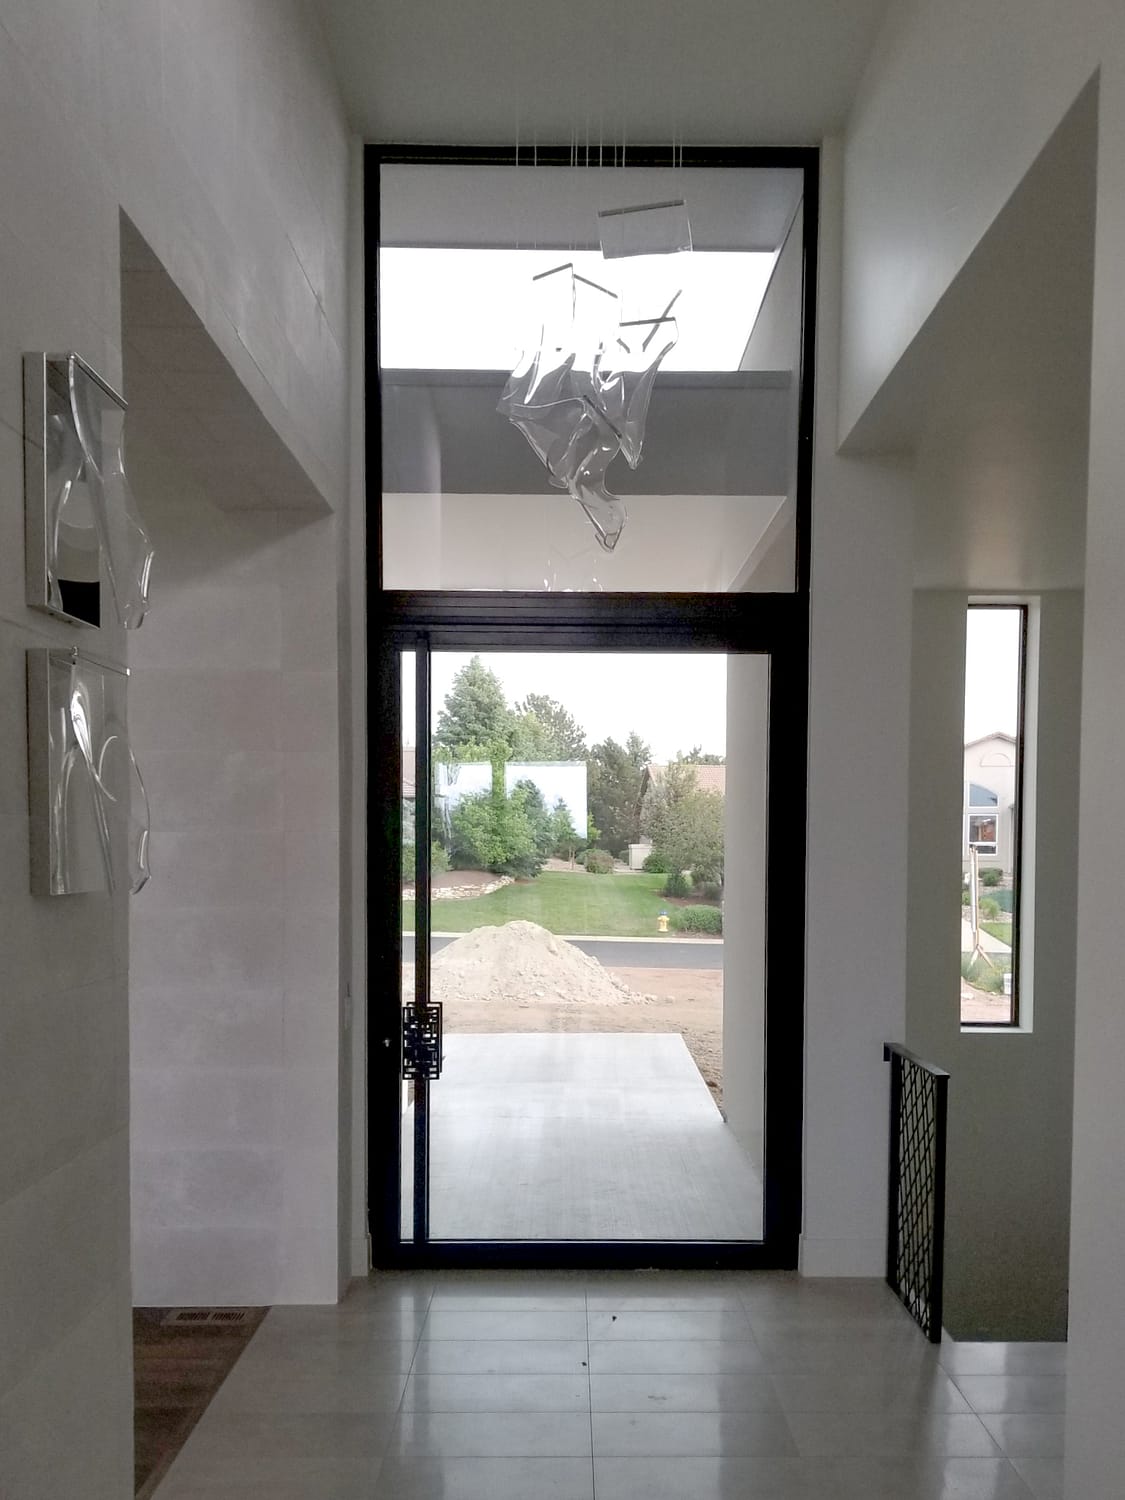 A glass pivot door below and a large fixed window above complete this glass wall.